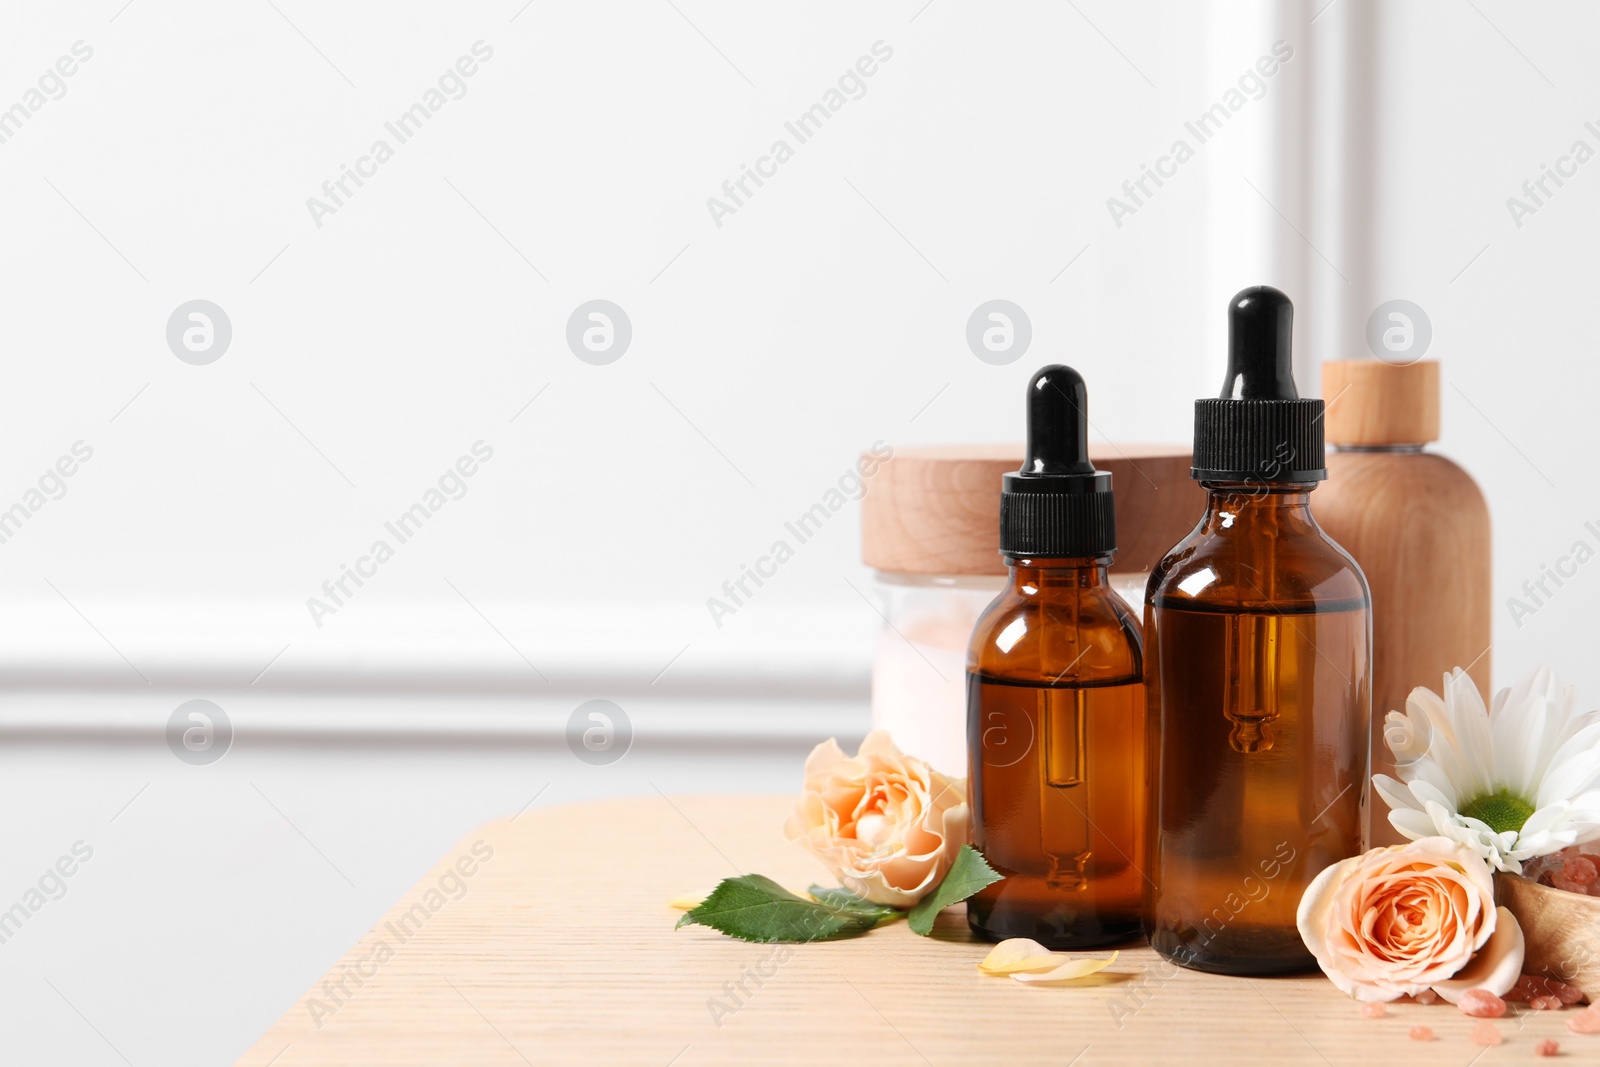 Photo of Bottles of cosmetic serum, beauty products and flowers on wooden table, space for text